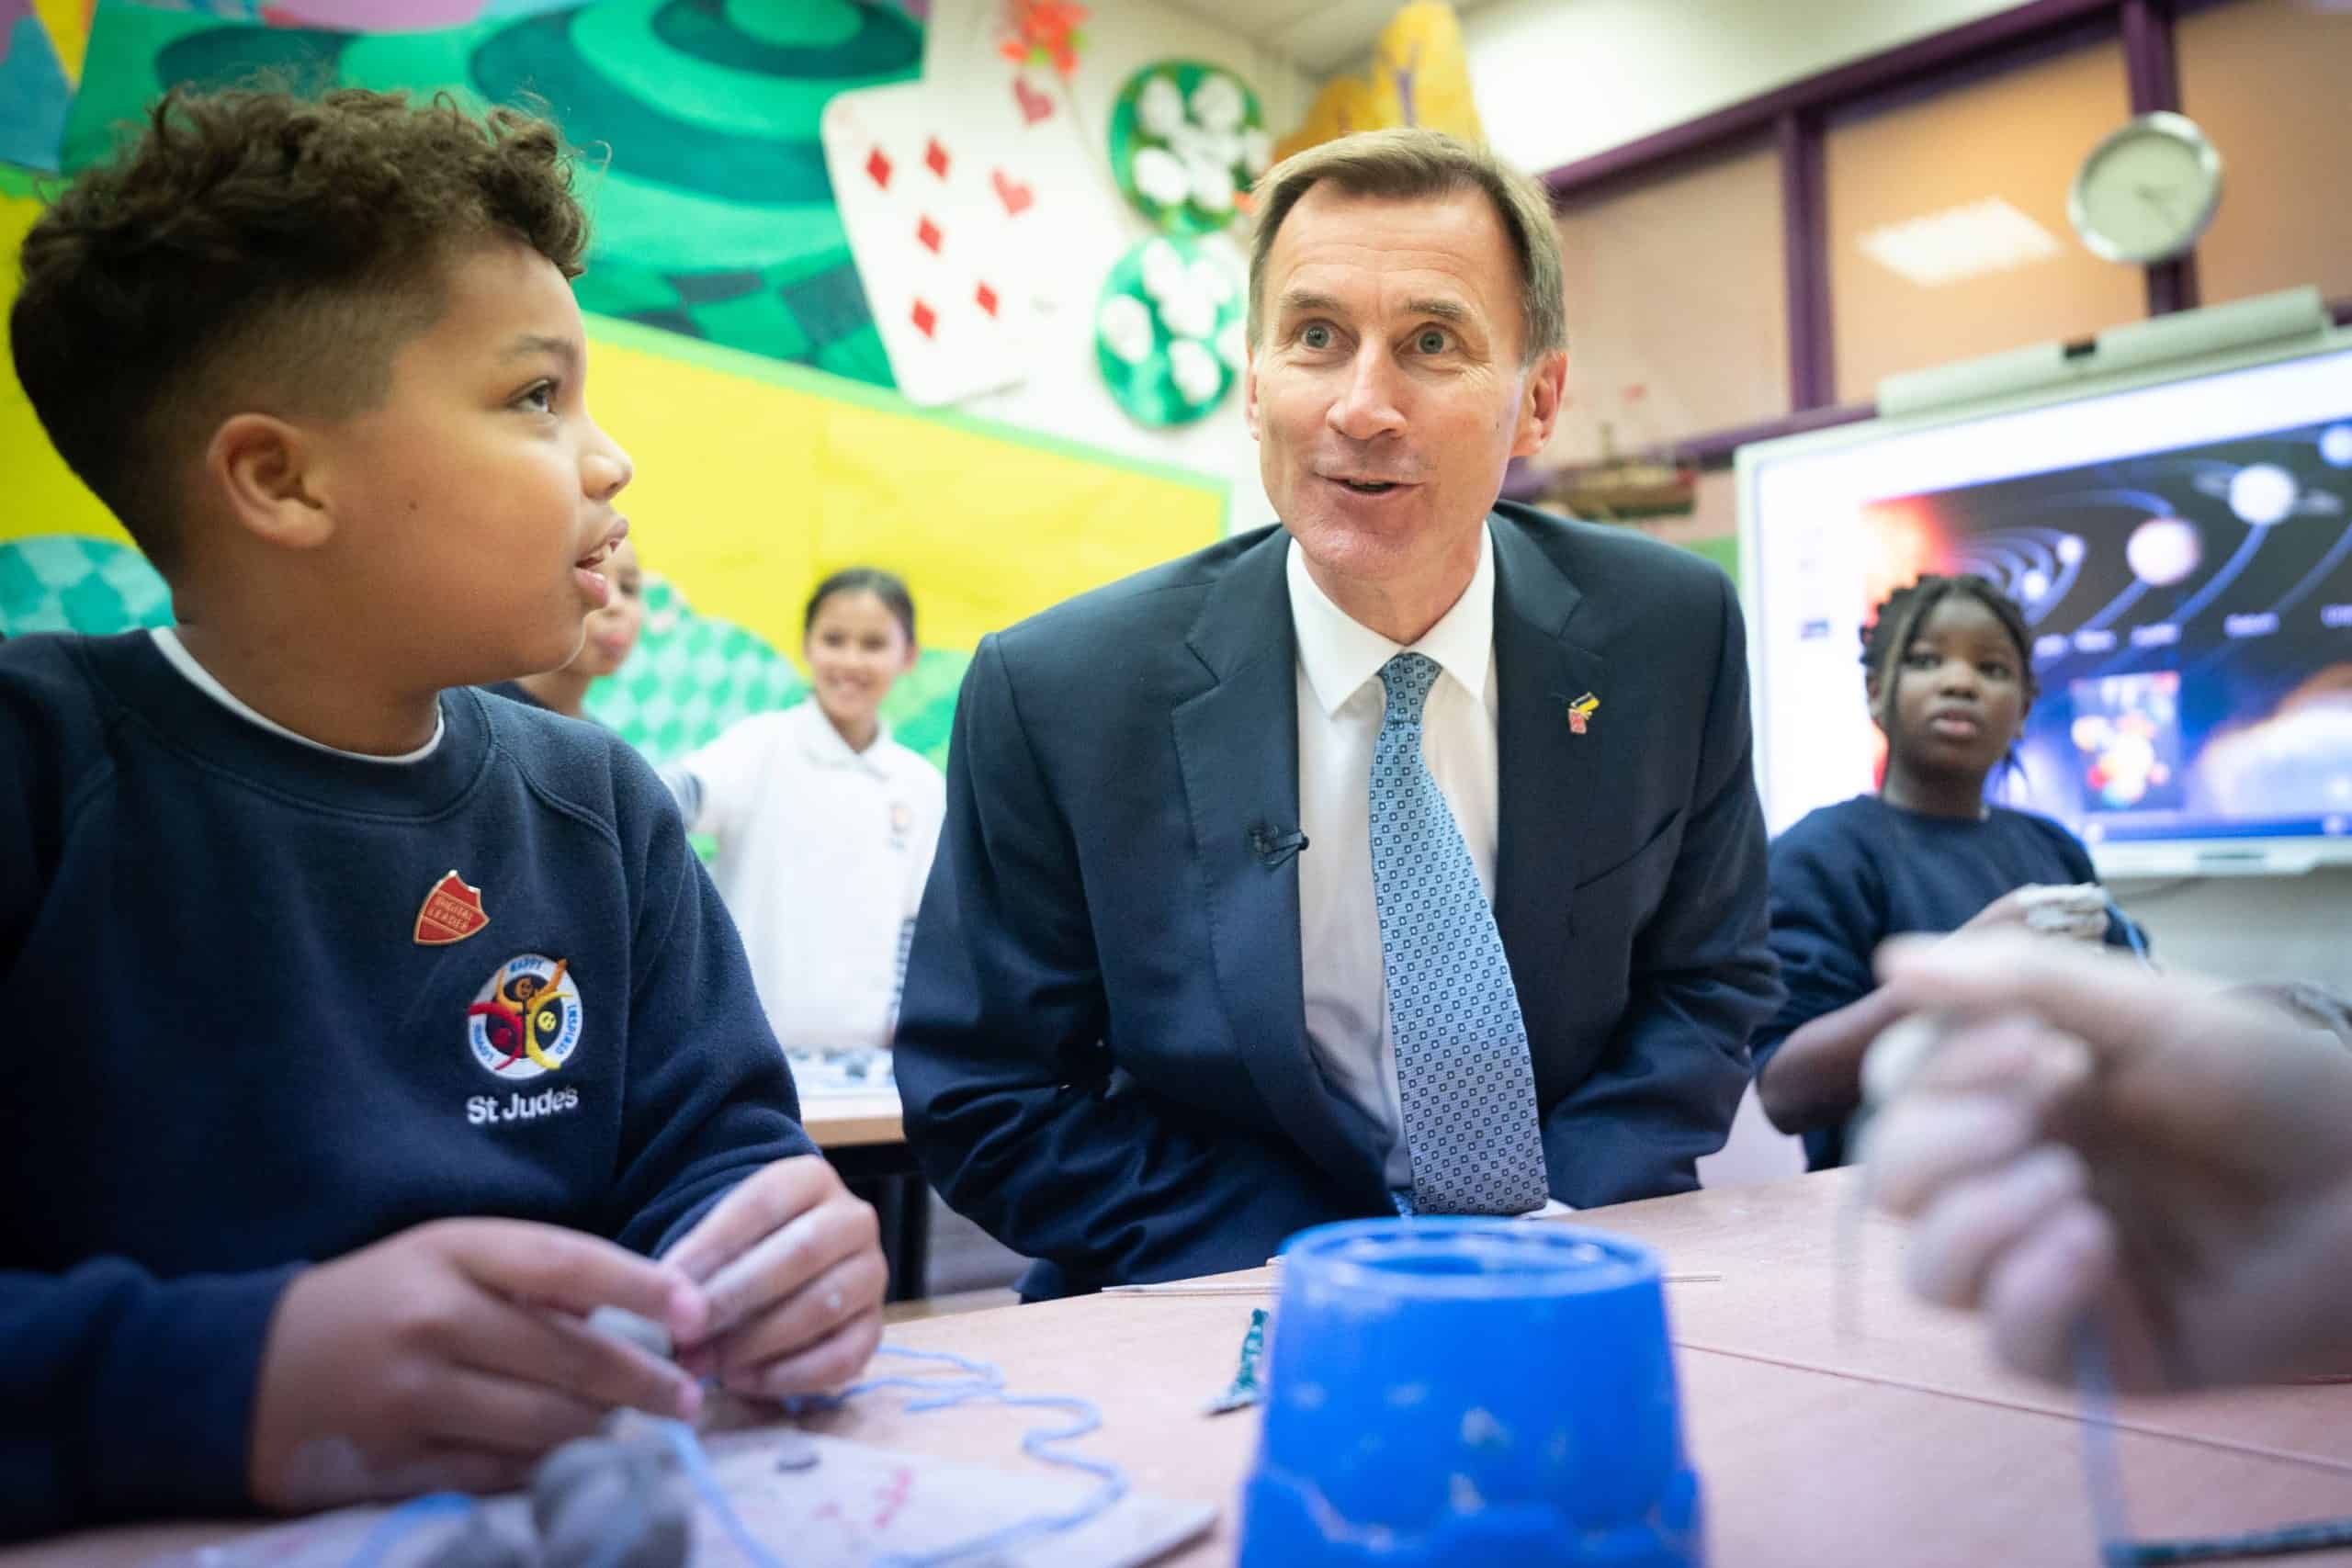 Hunt visits school named after the ‘patron saint of lost causes’